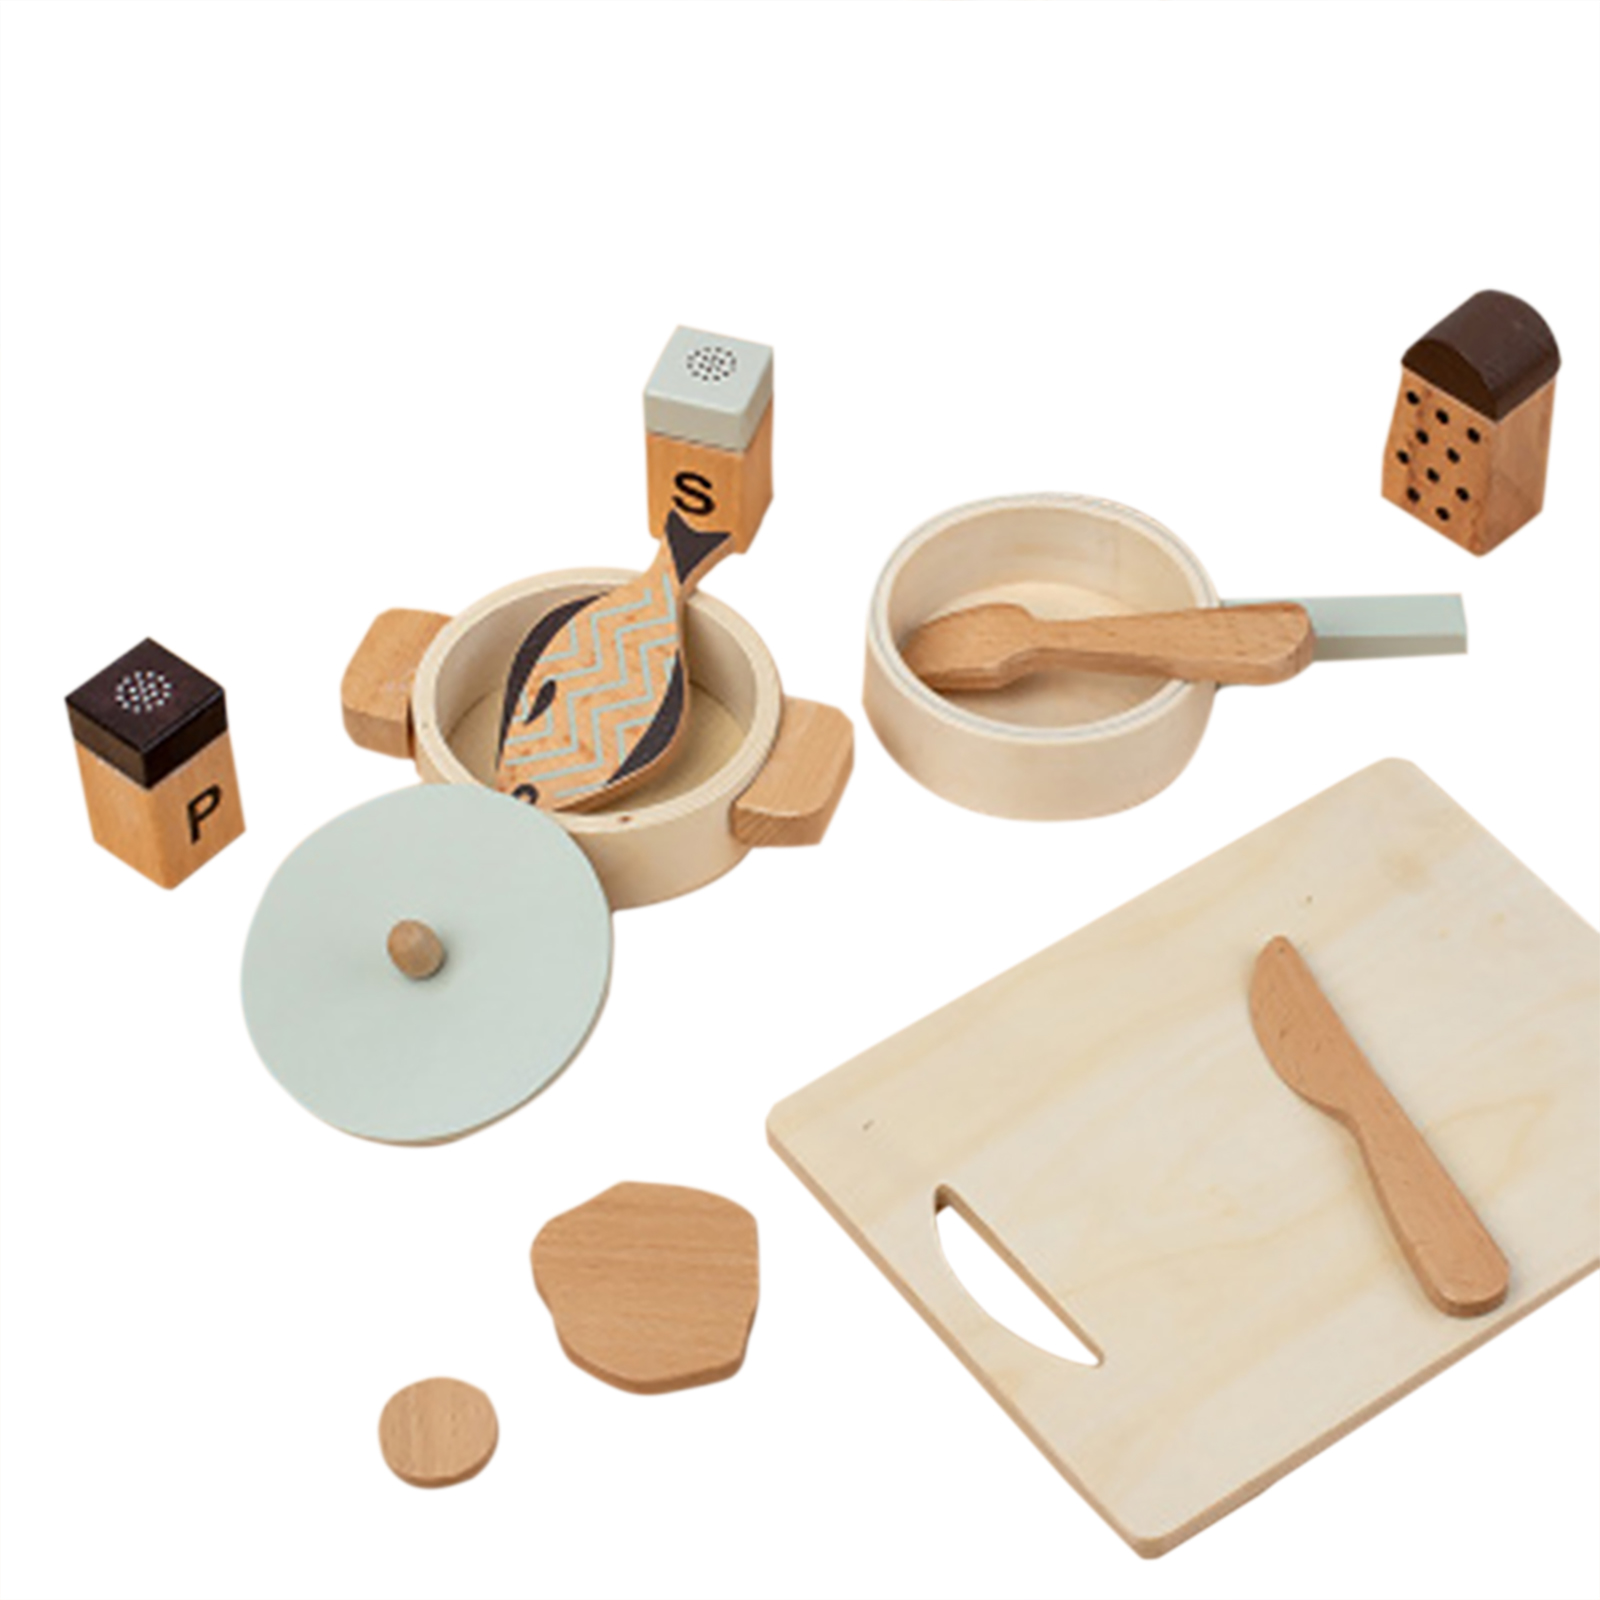 Play Kitchen Accessories Wooden Kitchen Cookware Pots Pans Cooking Playset Sensory Toys For Toddlers Girls Boys